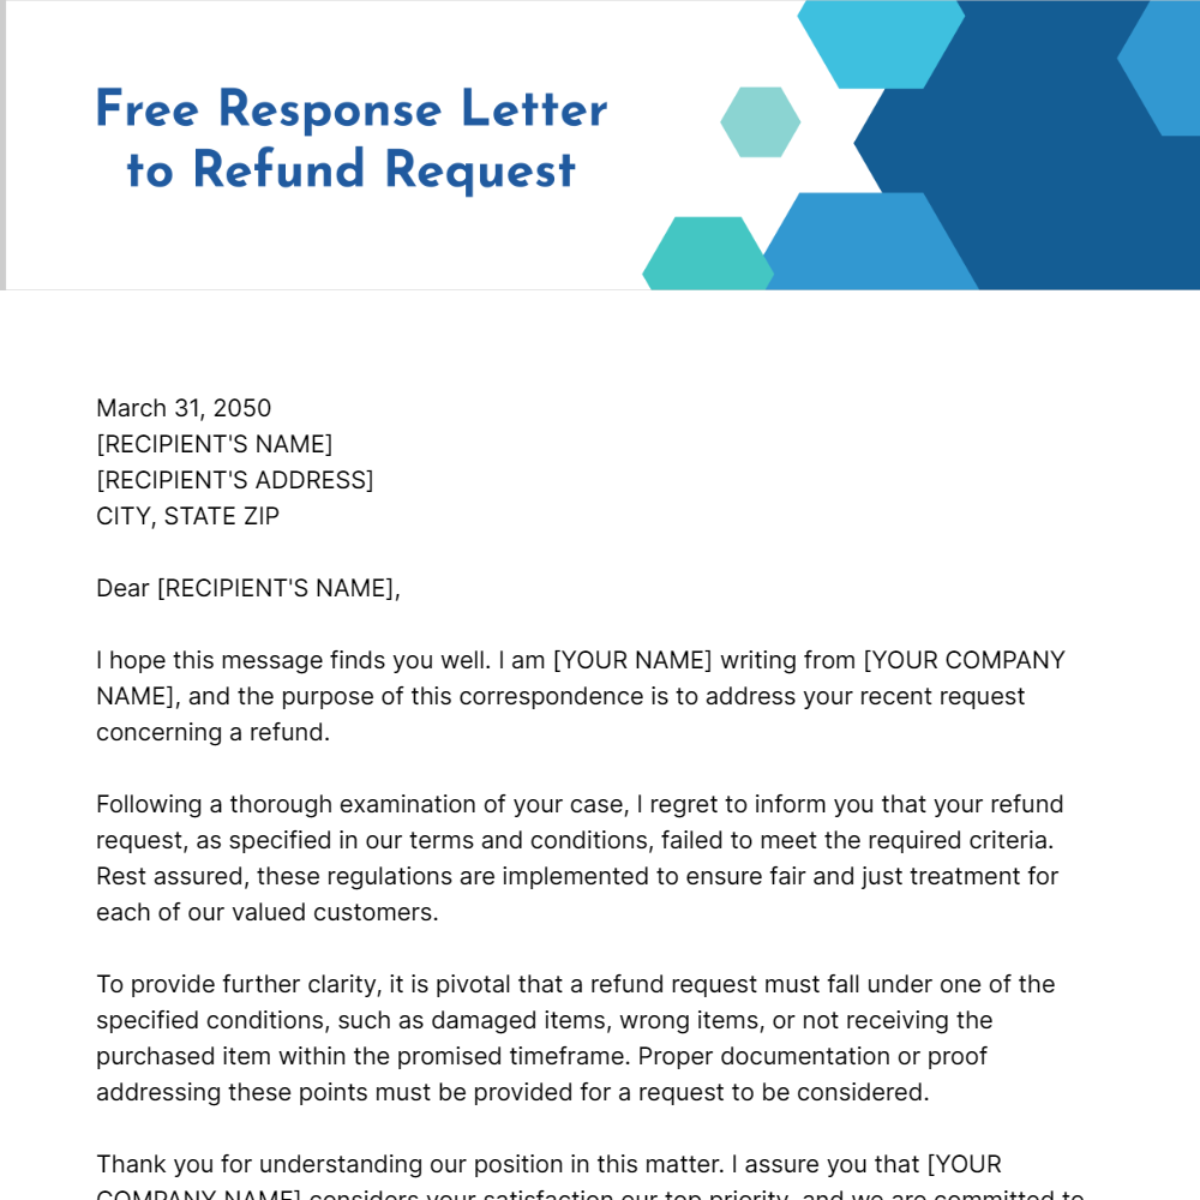 Free Response Letter to Refund Request